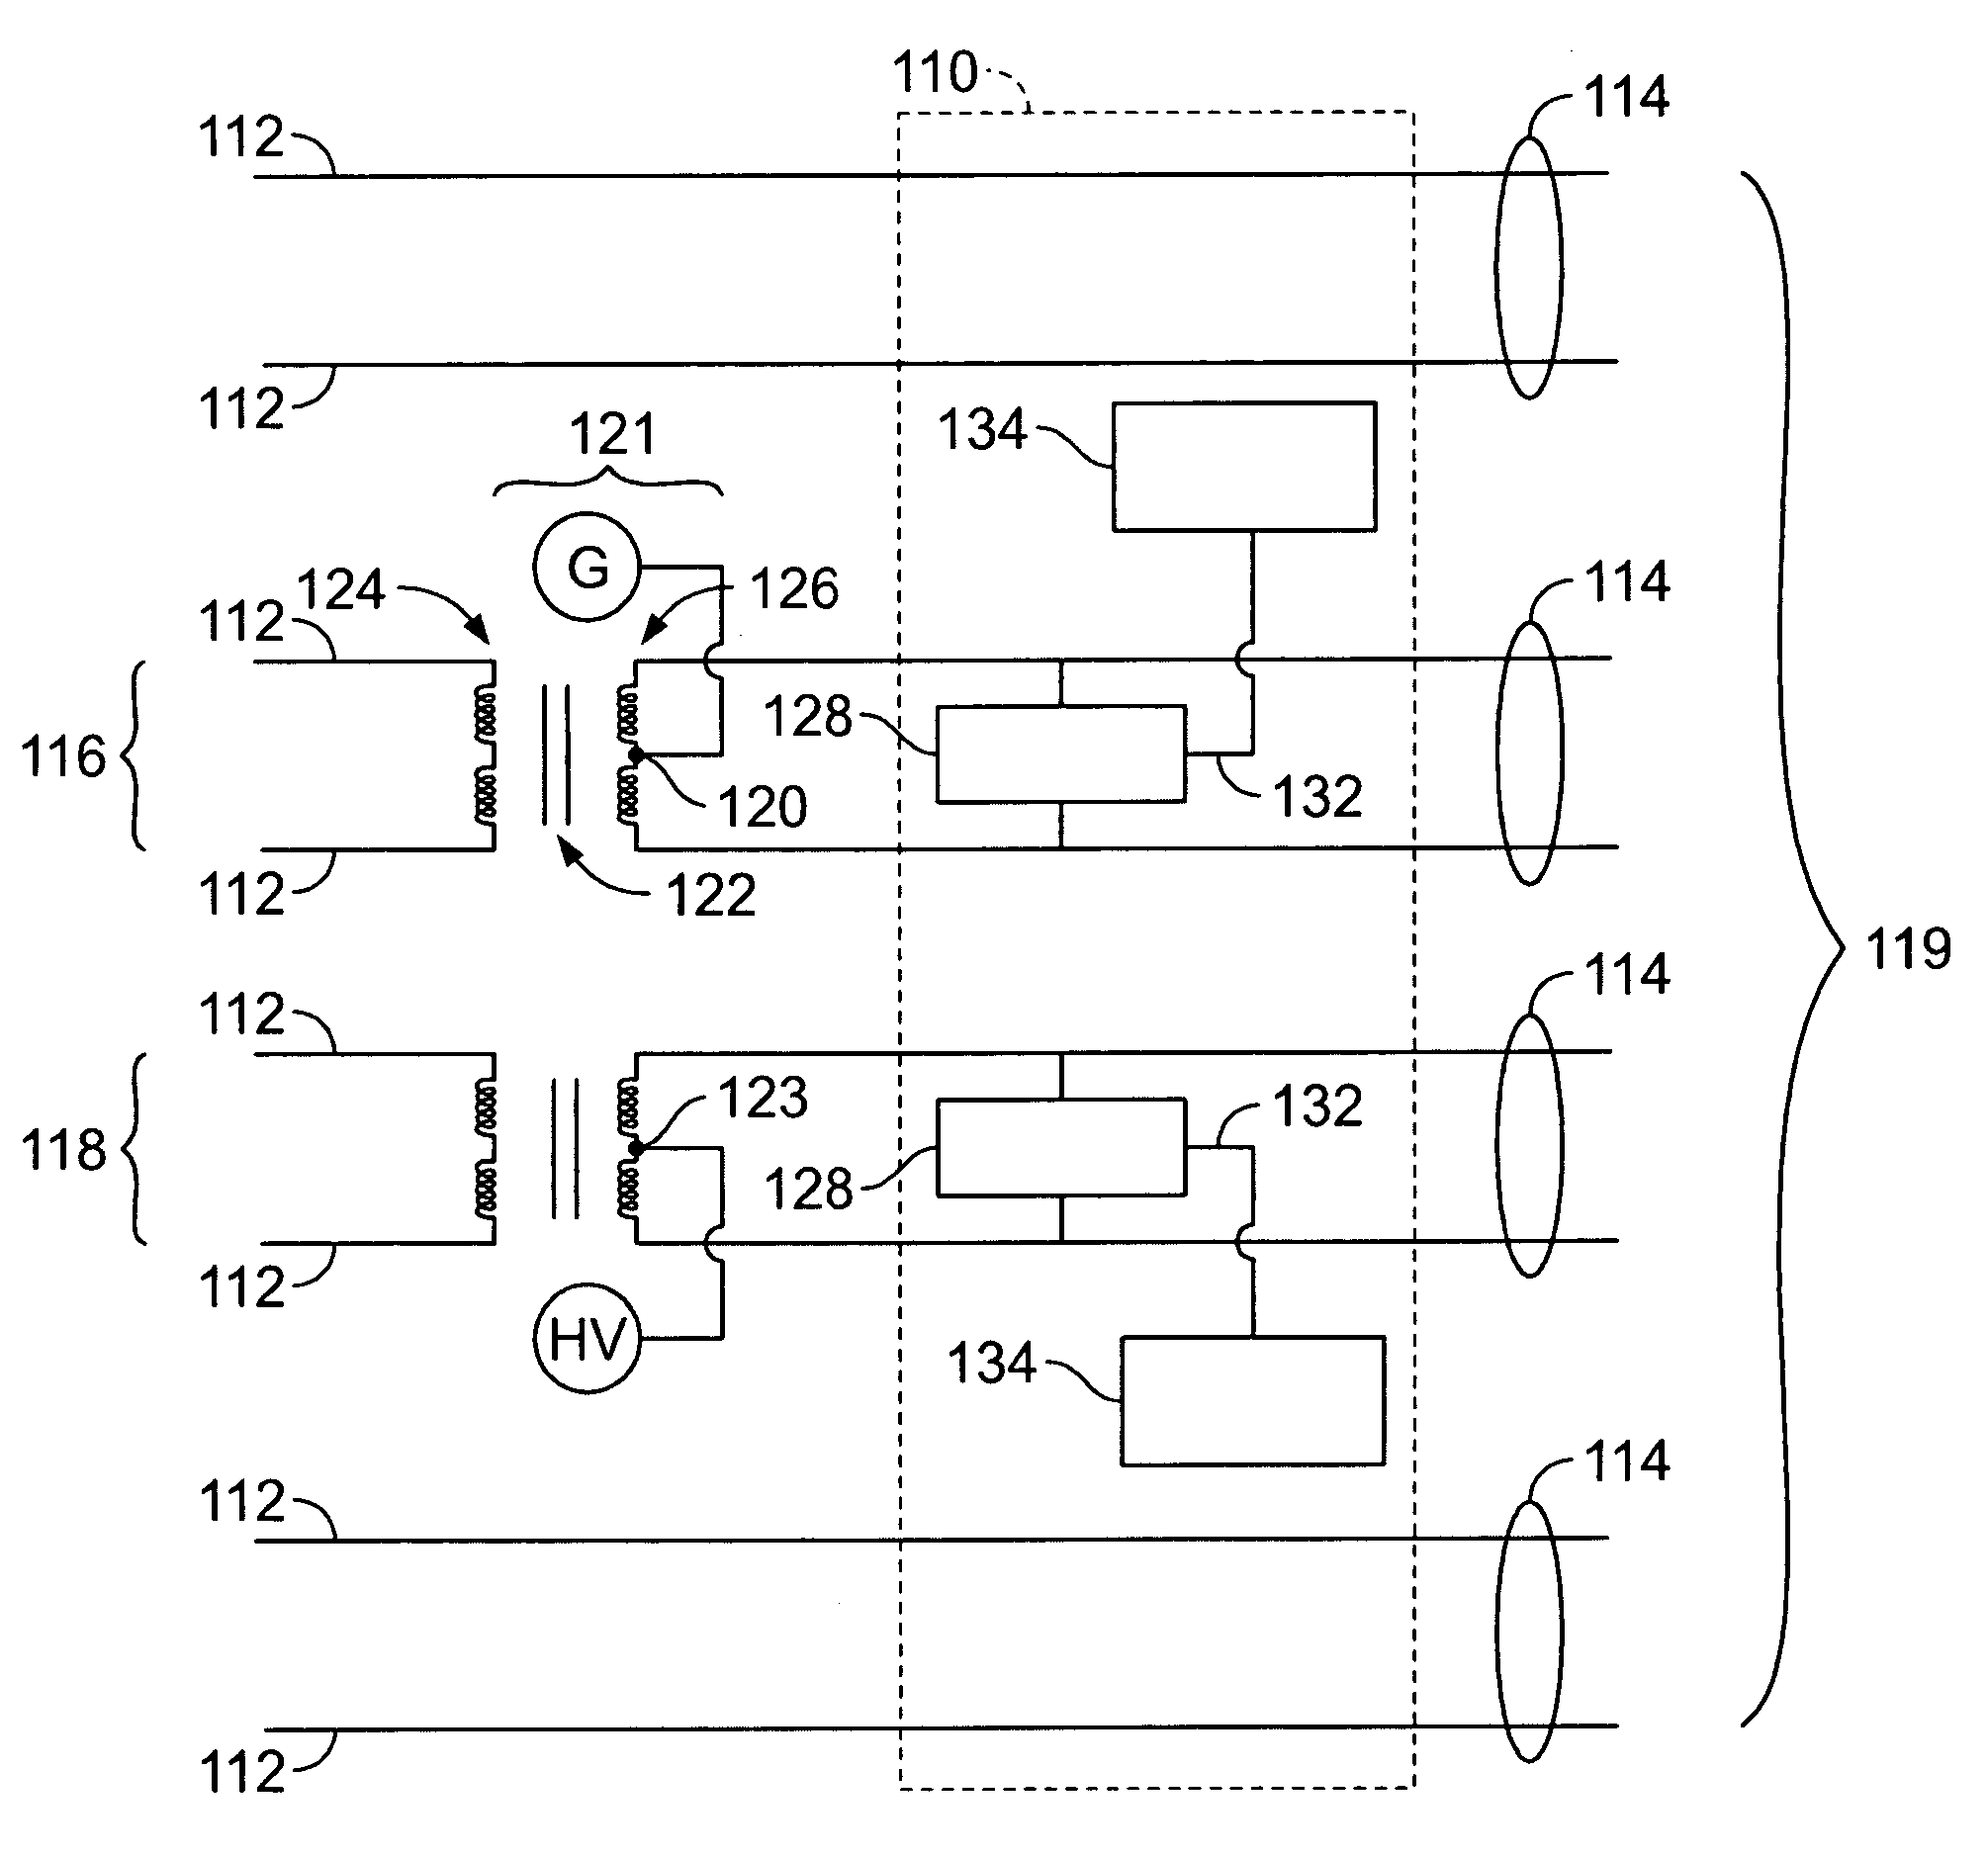 Method and apparatus for providing out of band communications over structured cabling